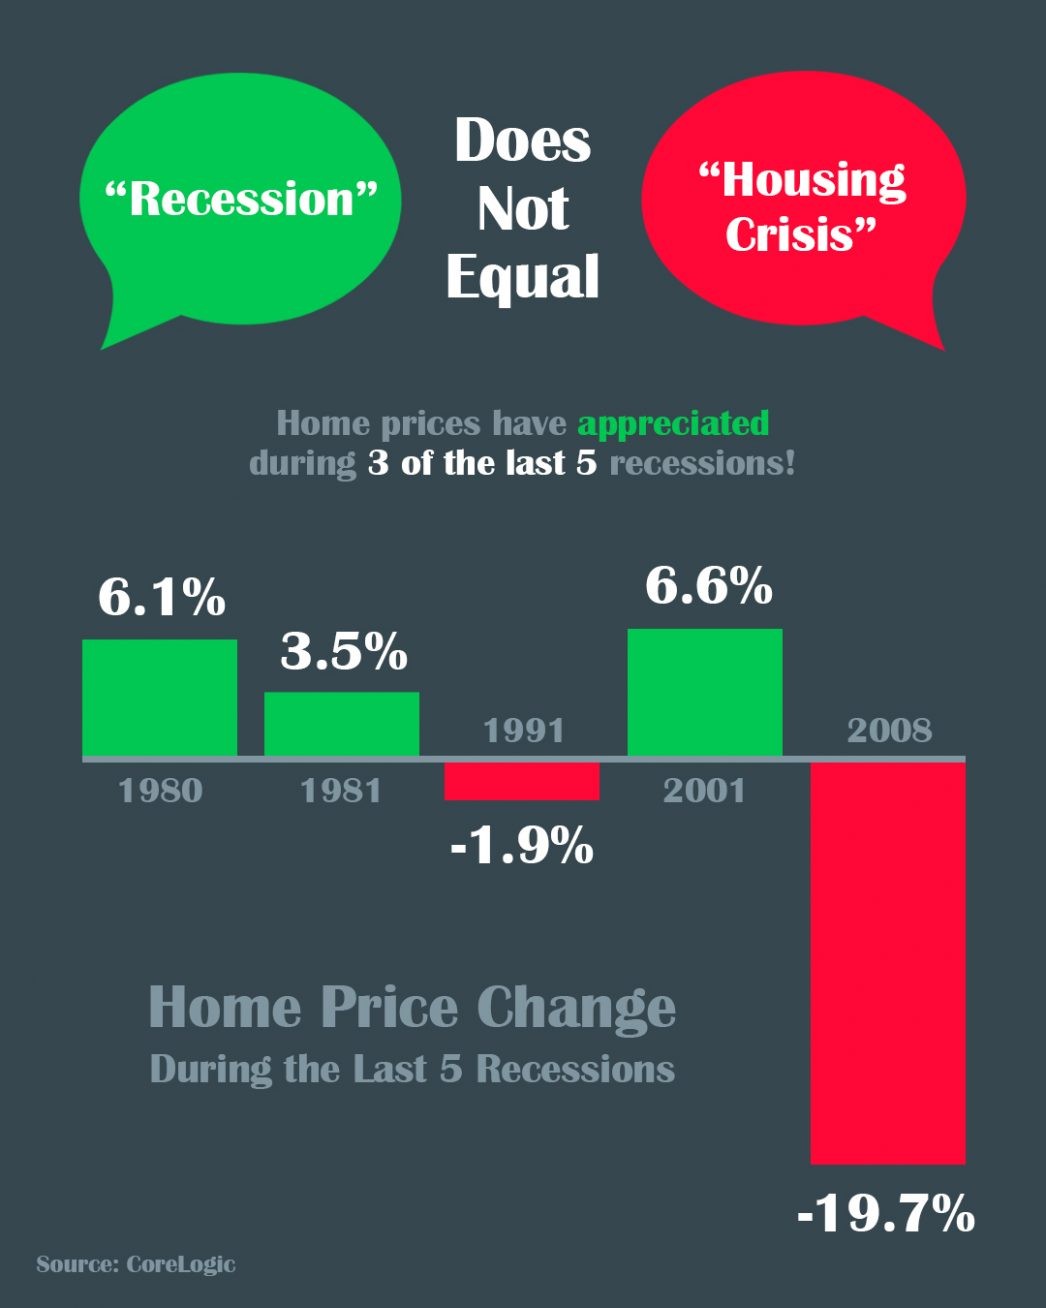 A Recession Does Not Equal a Housing Crisis - BrookHampton Realty